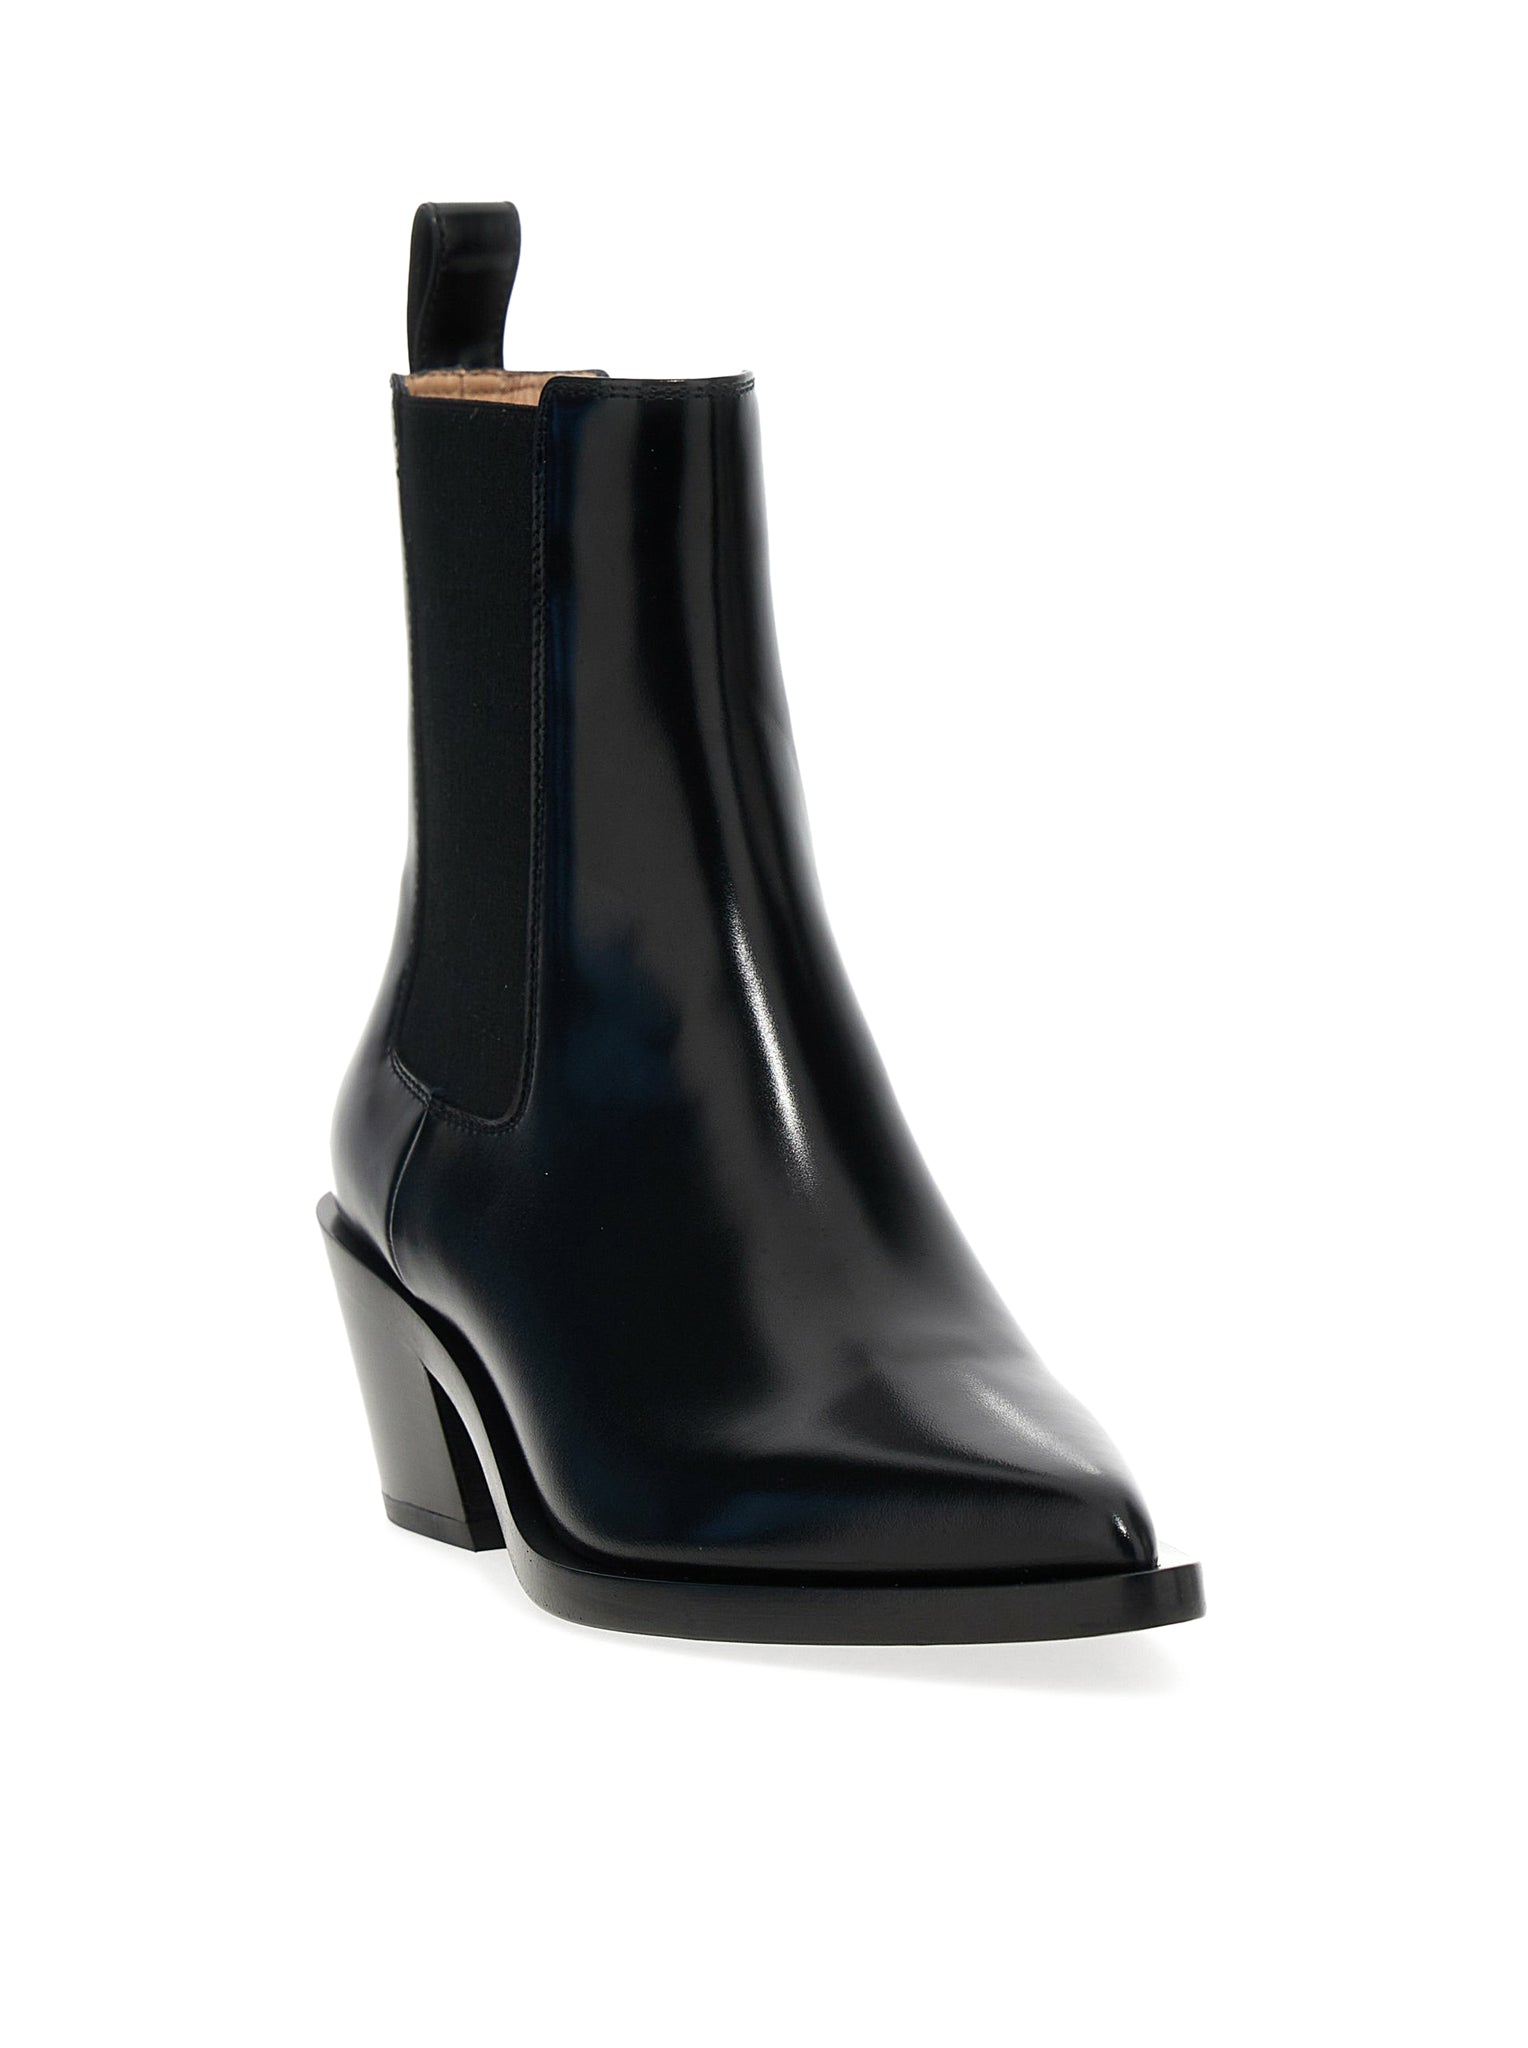 Gianvito Rossi ankle boot in brushed leather